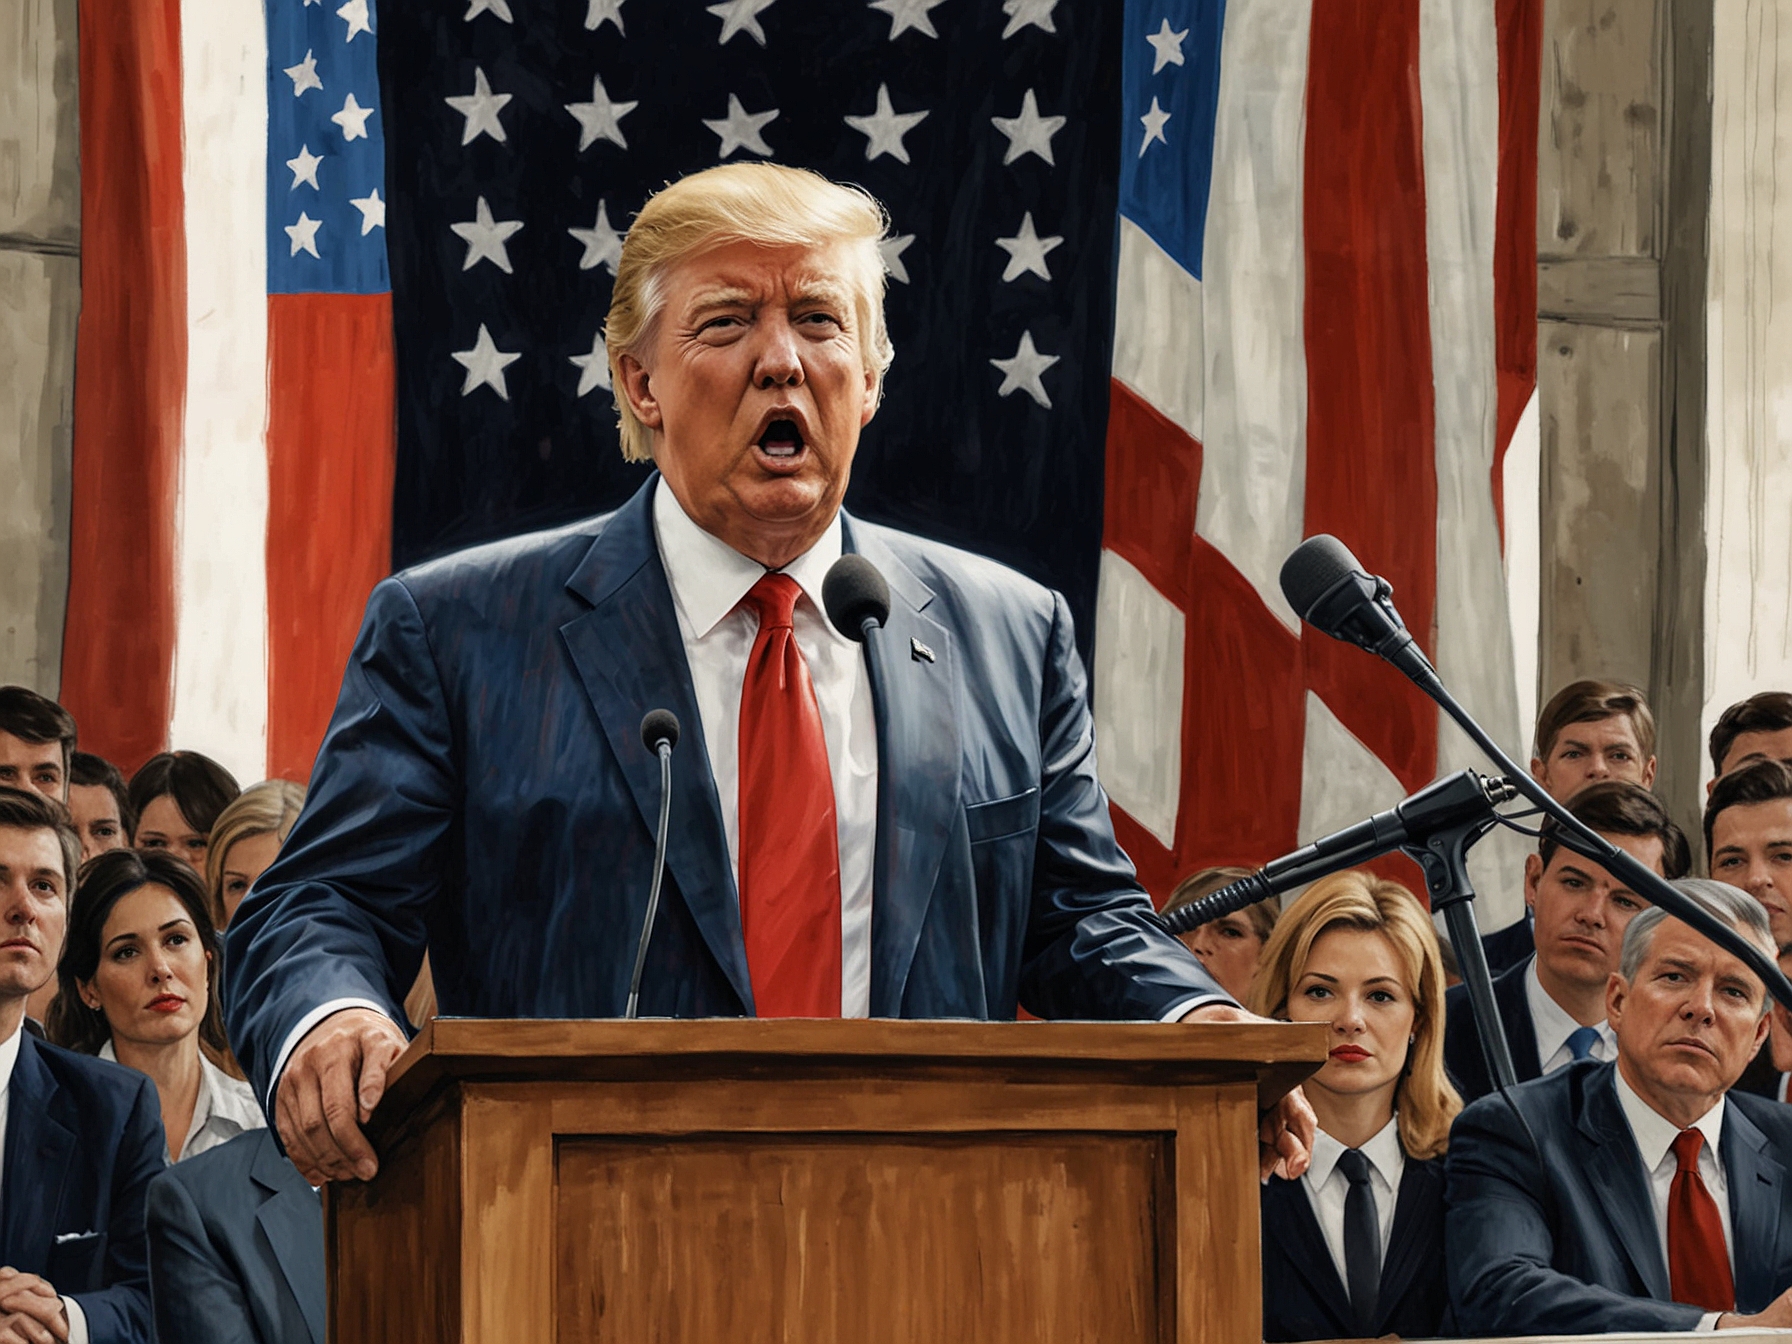 Donald Trump at a previous press conference, speaking into a microphone with a backdrop of American flags.